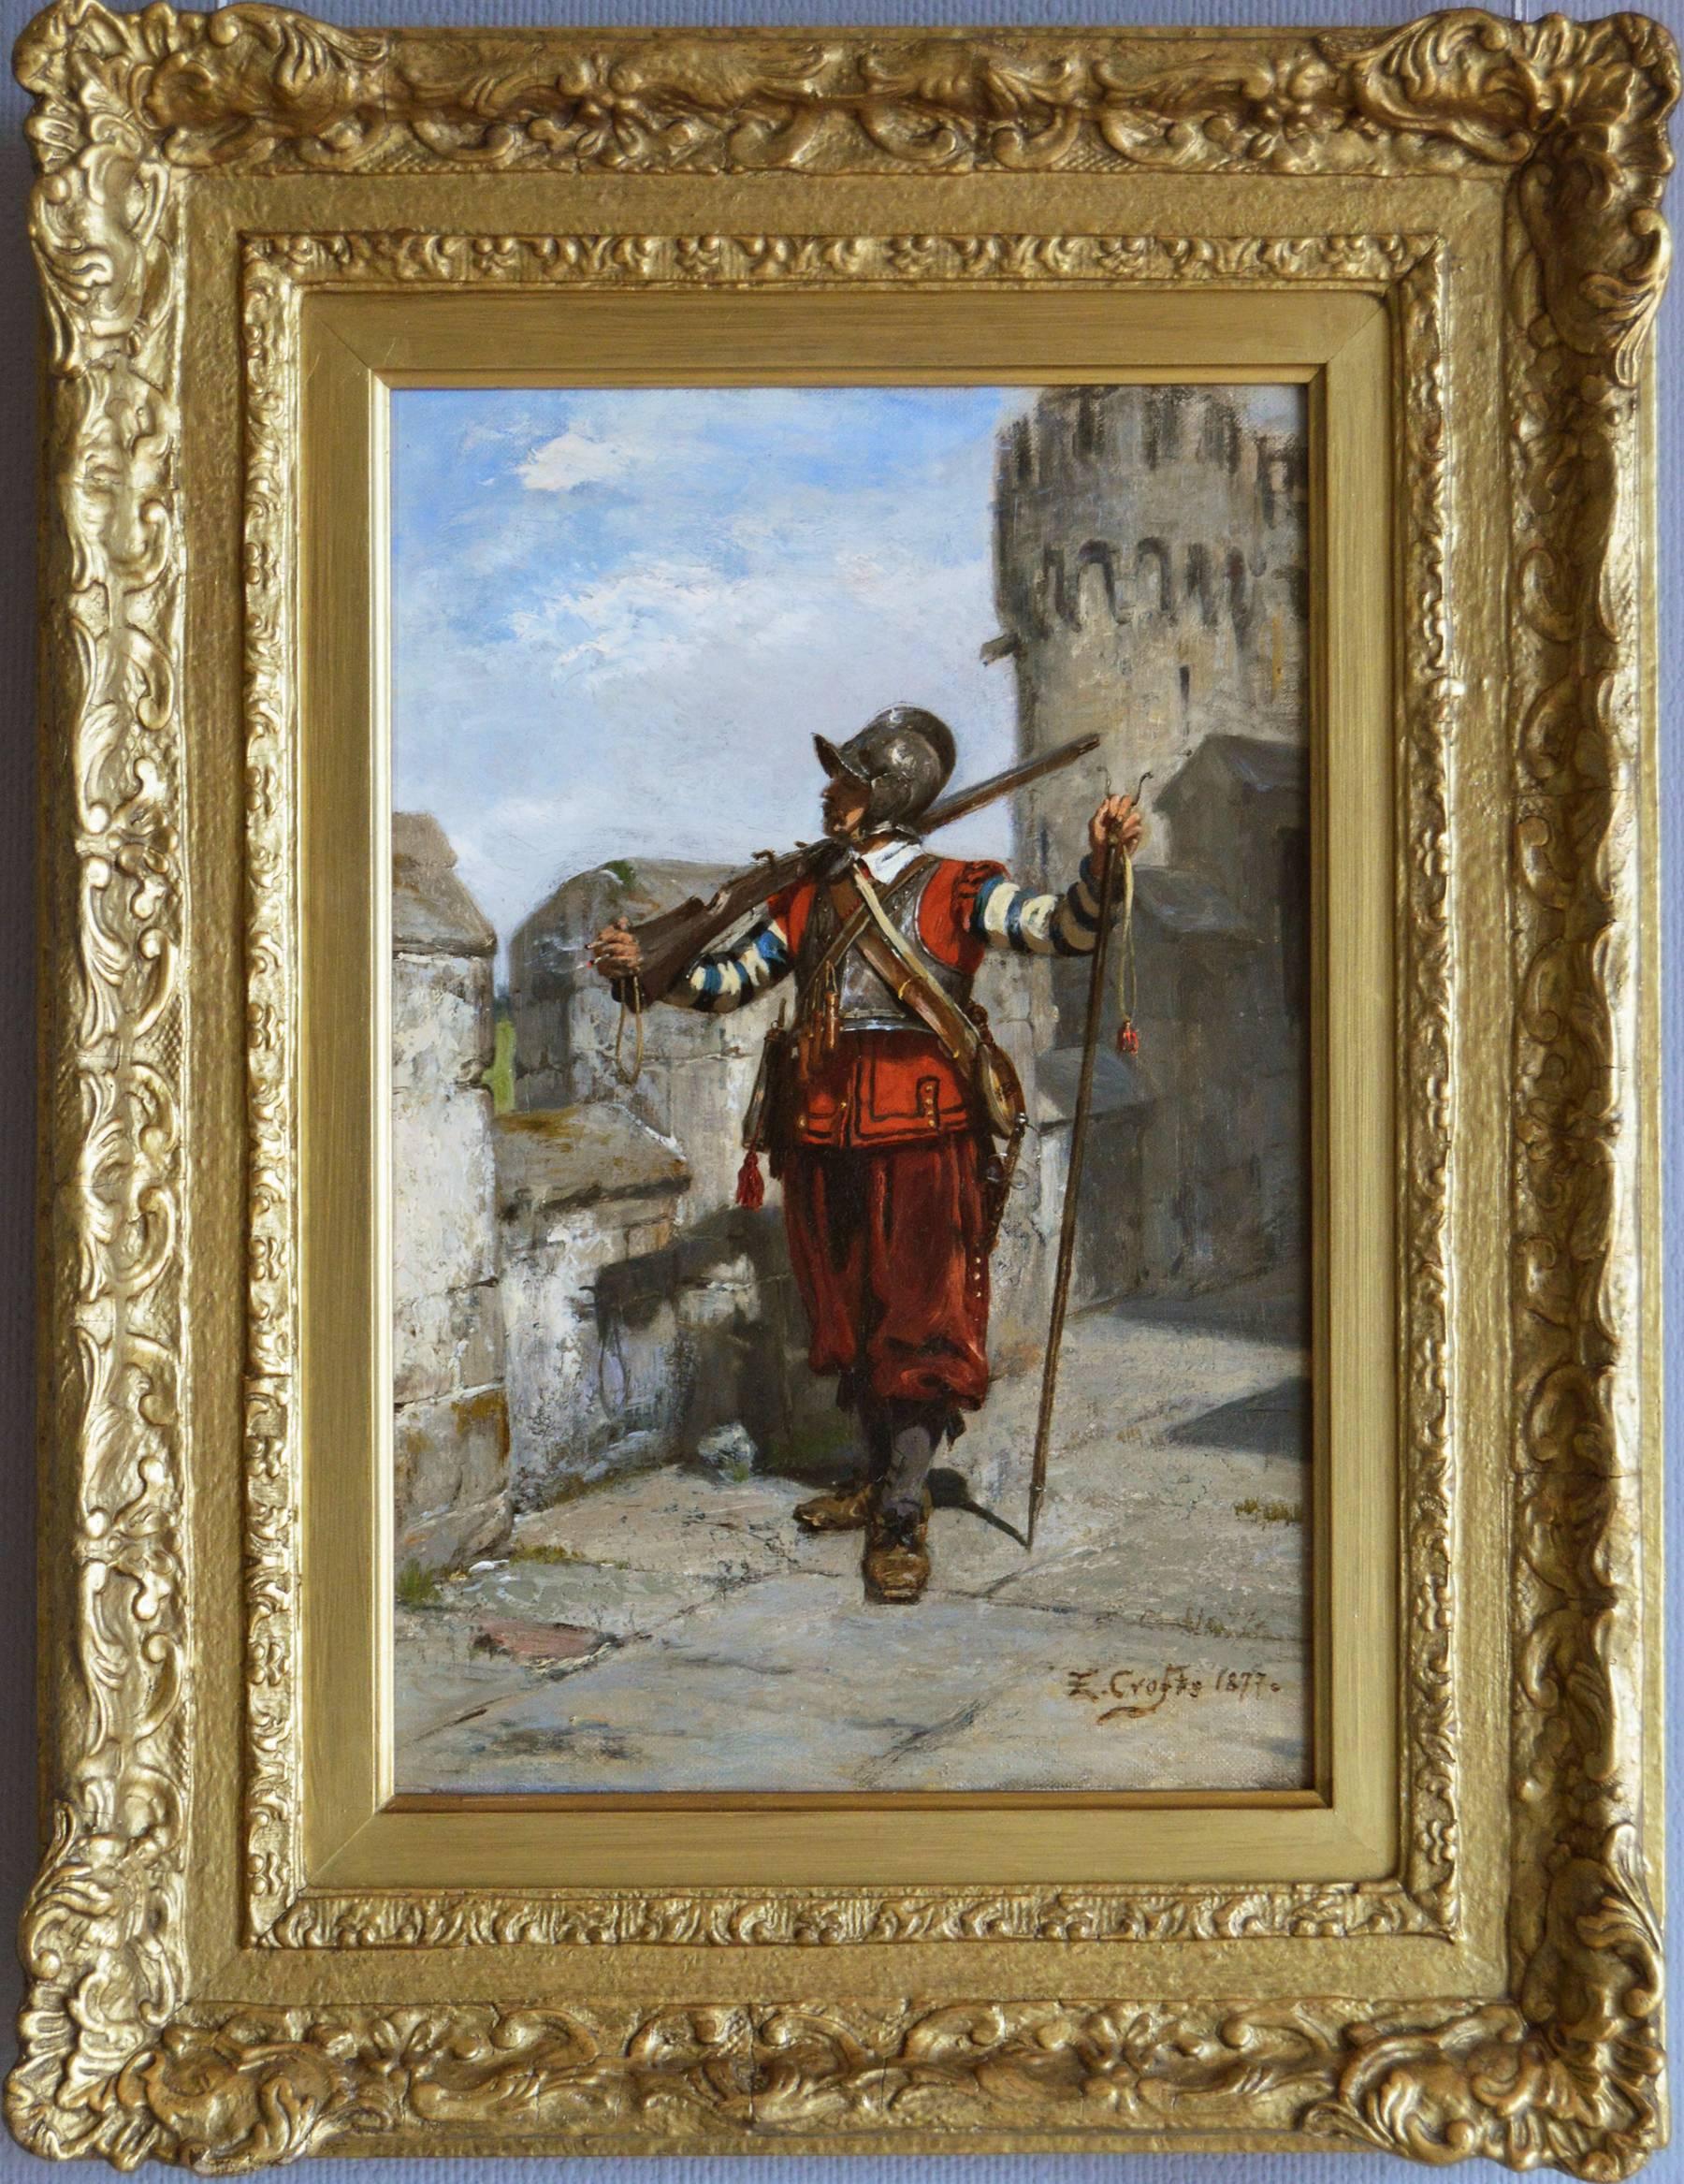 Ernest Crofts Figurative Painting - On Guard, Oil on canvas 